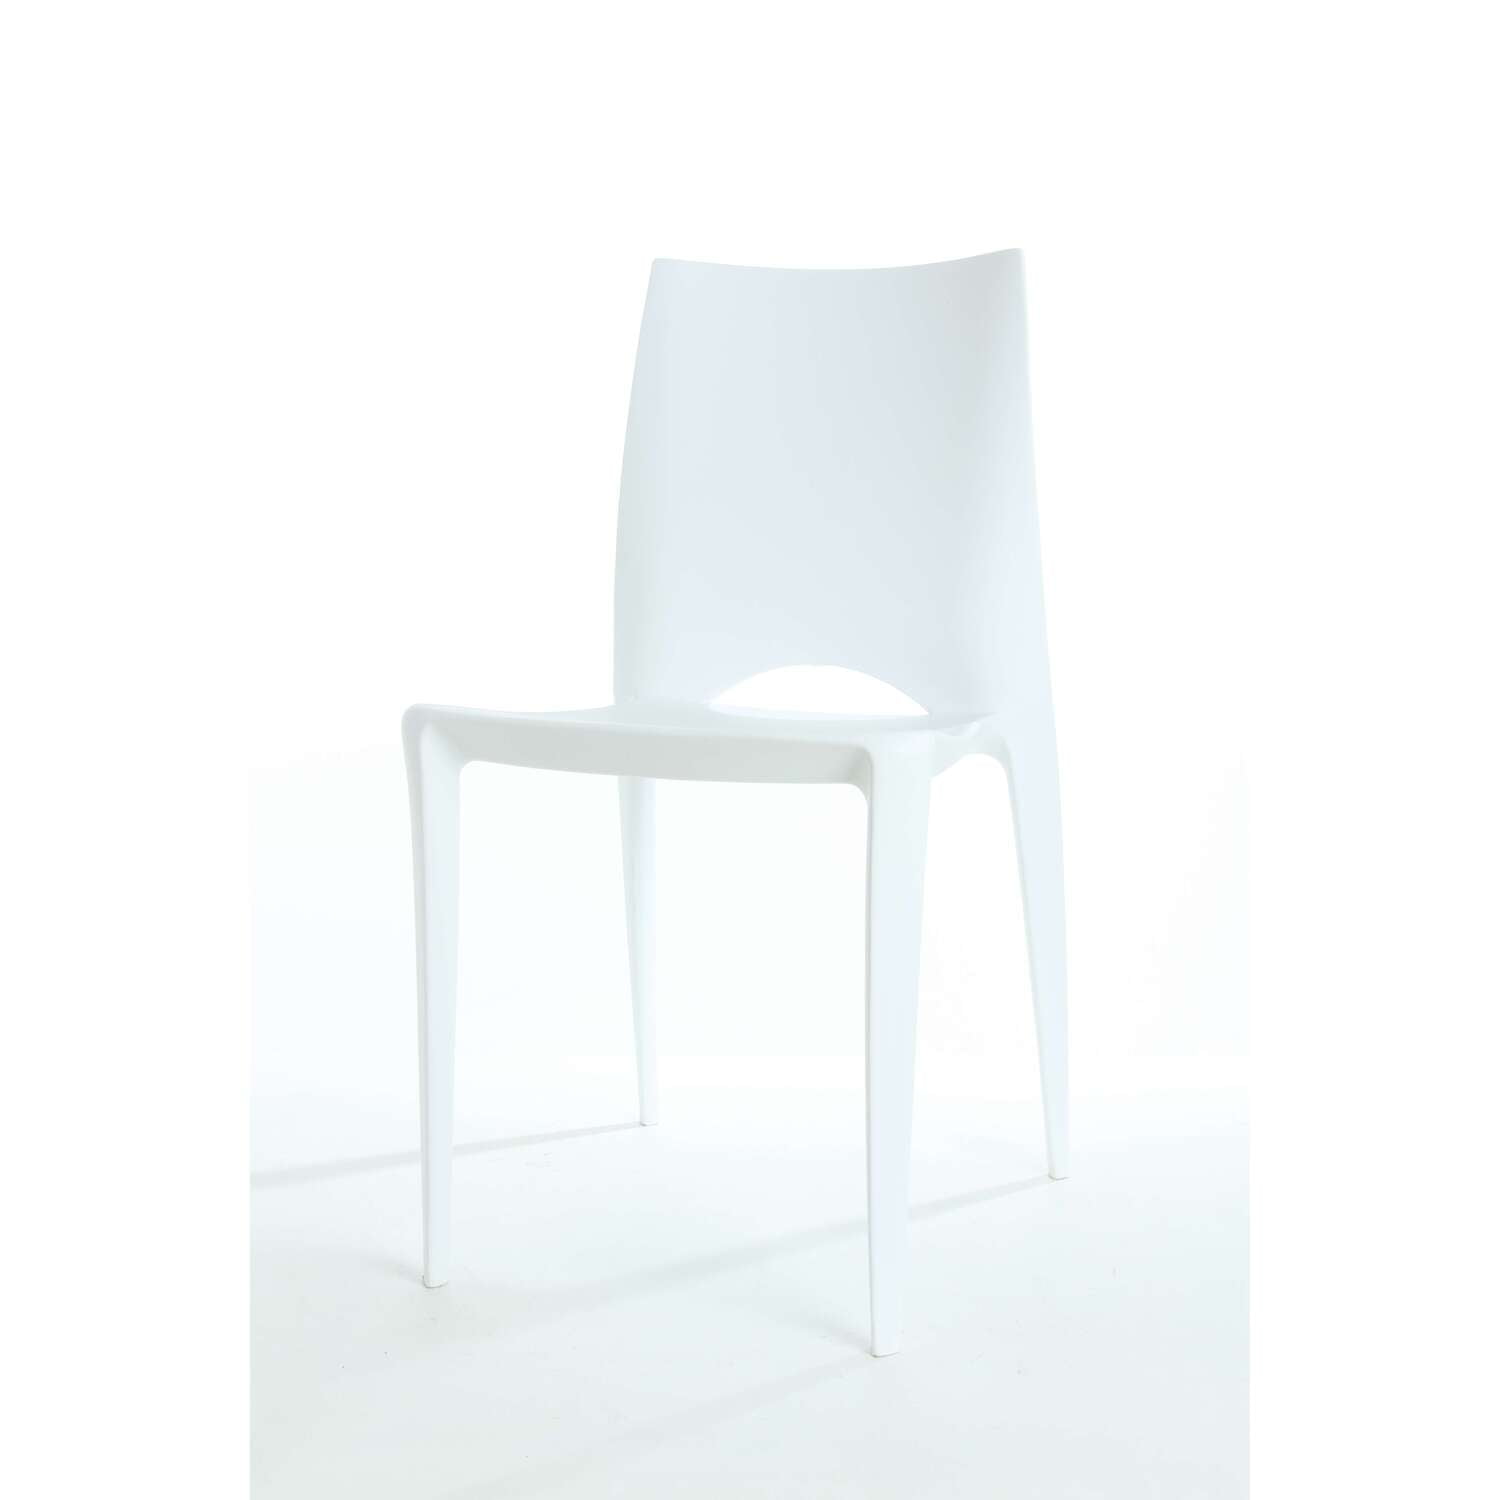 Rpp-crescent-wh Crescent Polyproplylene Stackable Chair - White - 32 In.